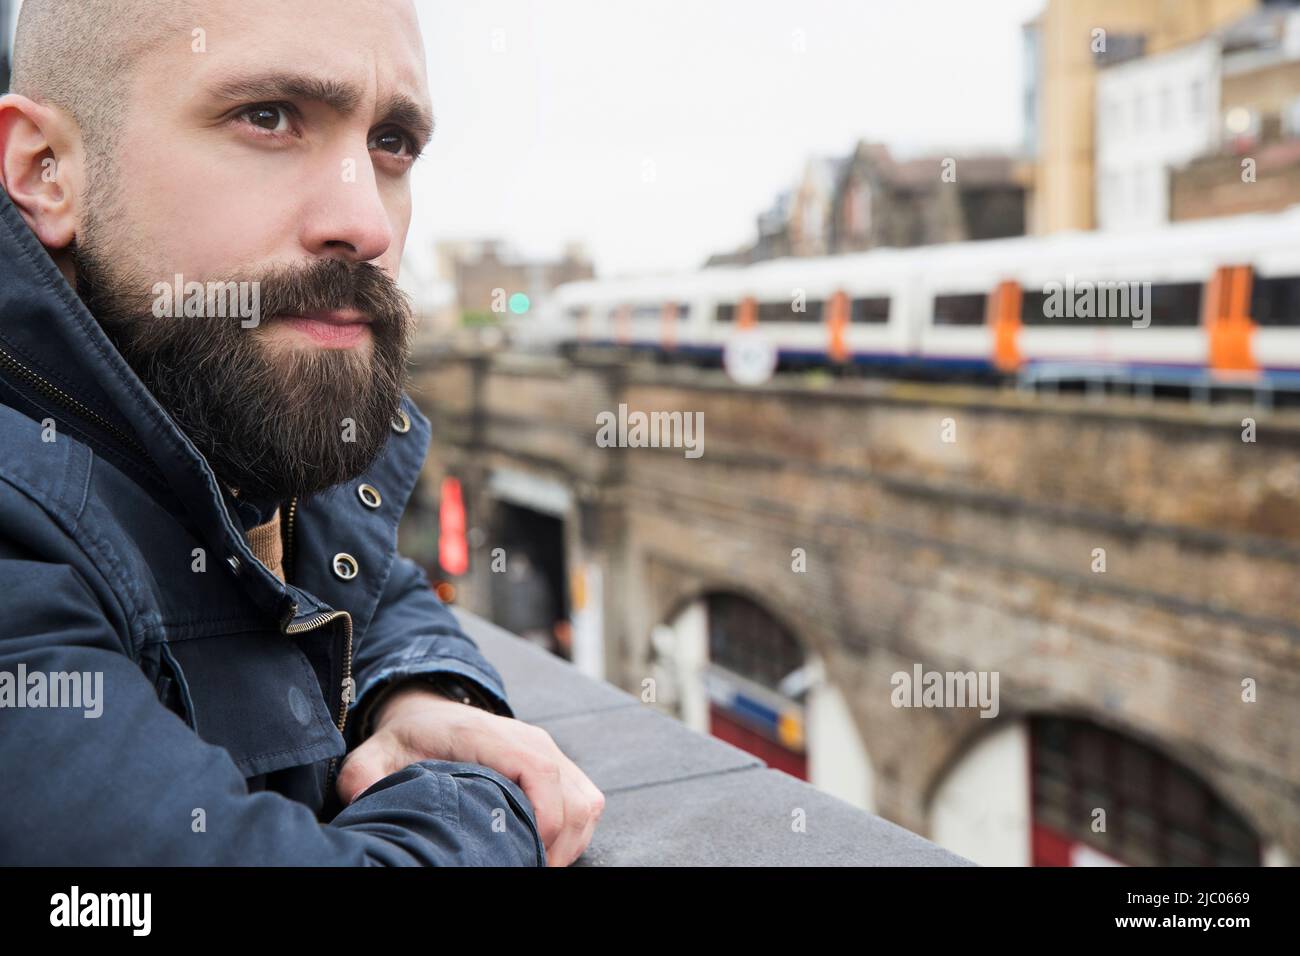 Man looking over ledge of building from rooftop patio Stock Photo